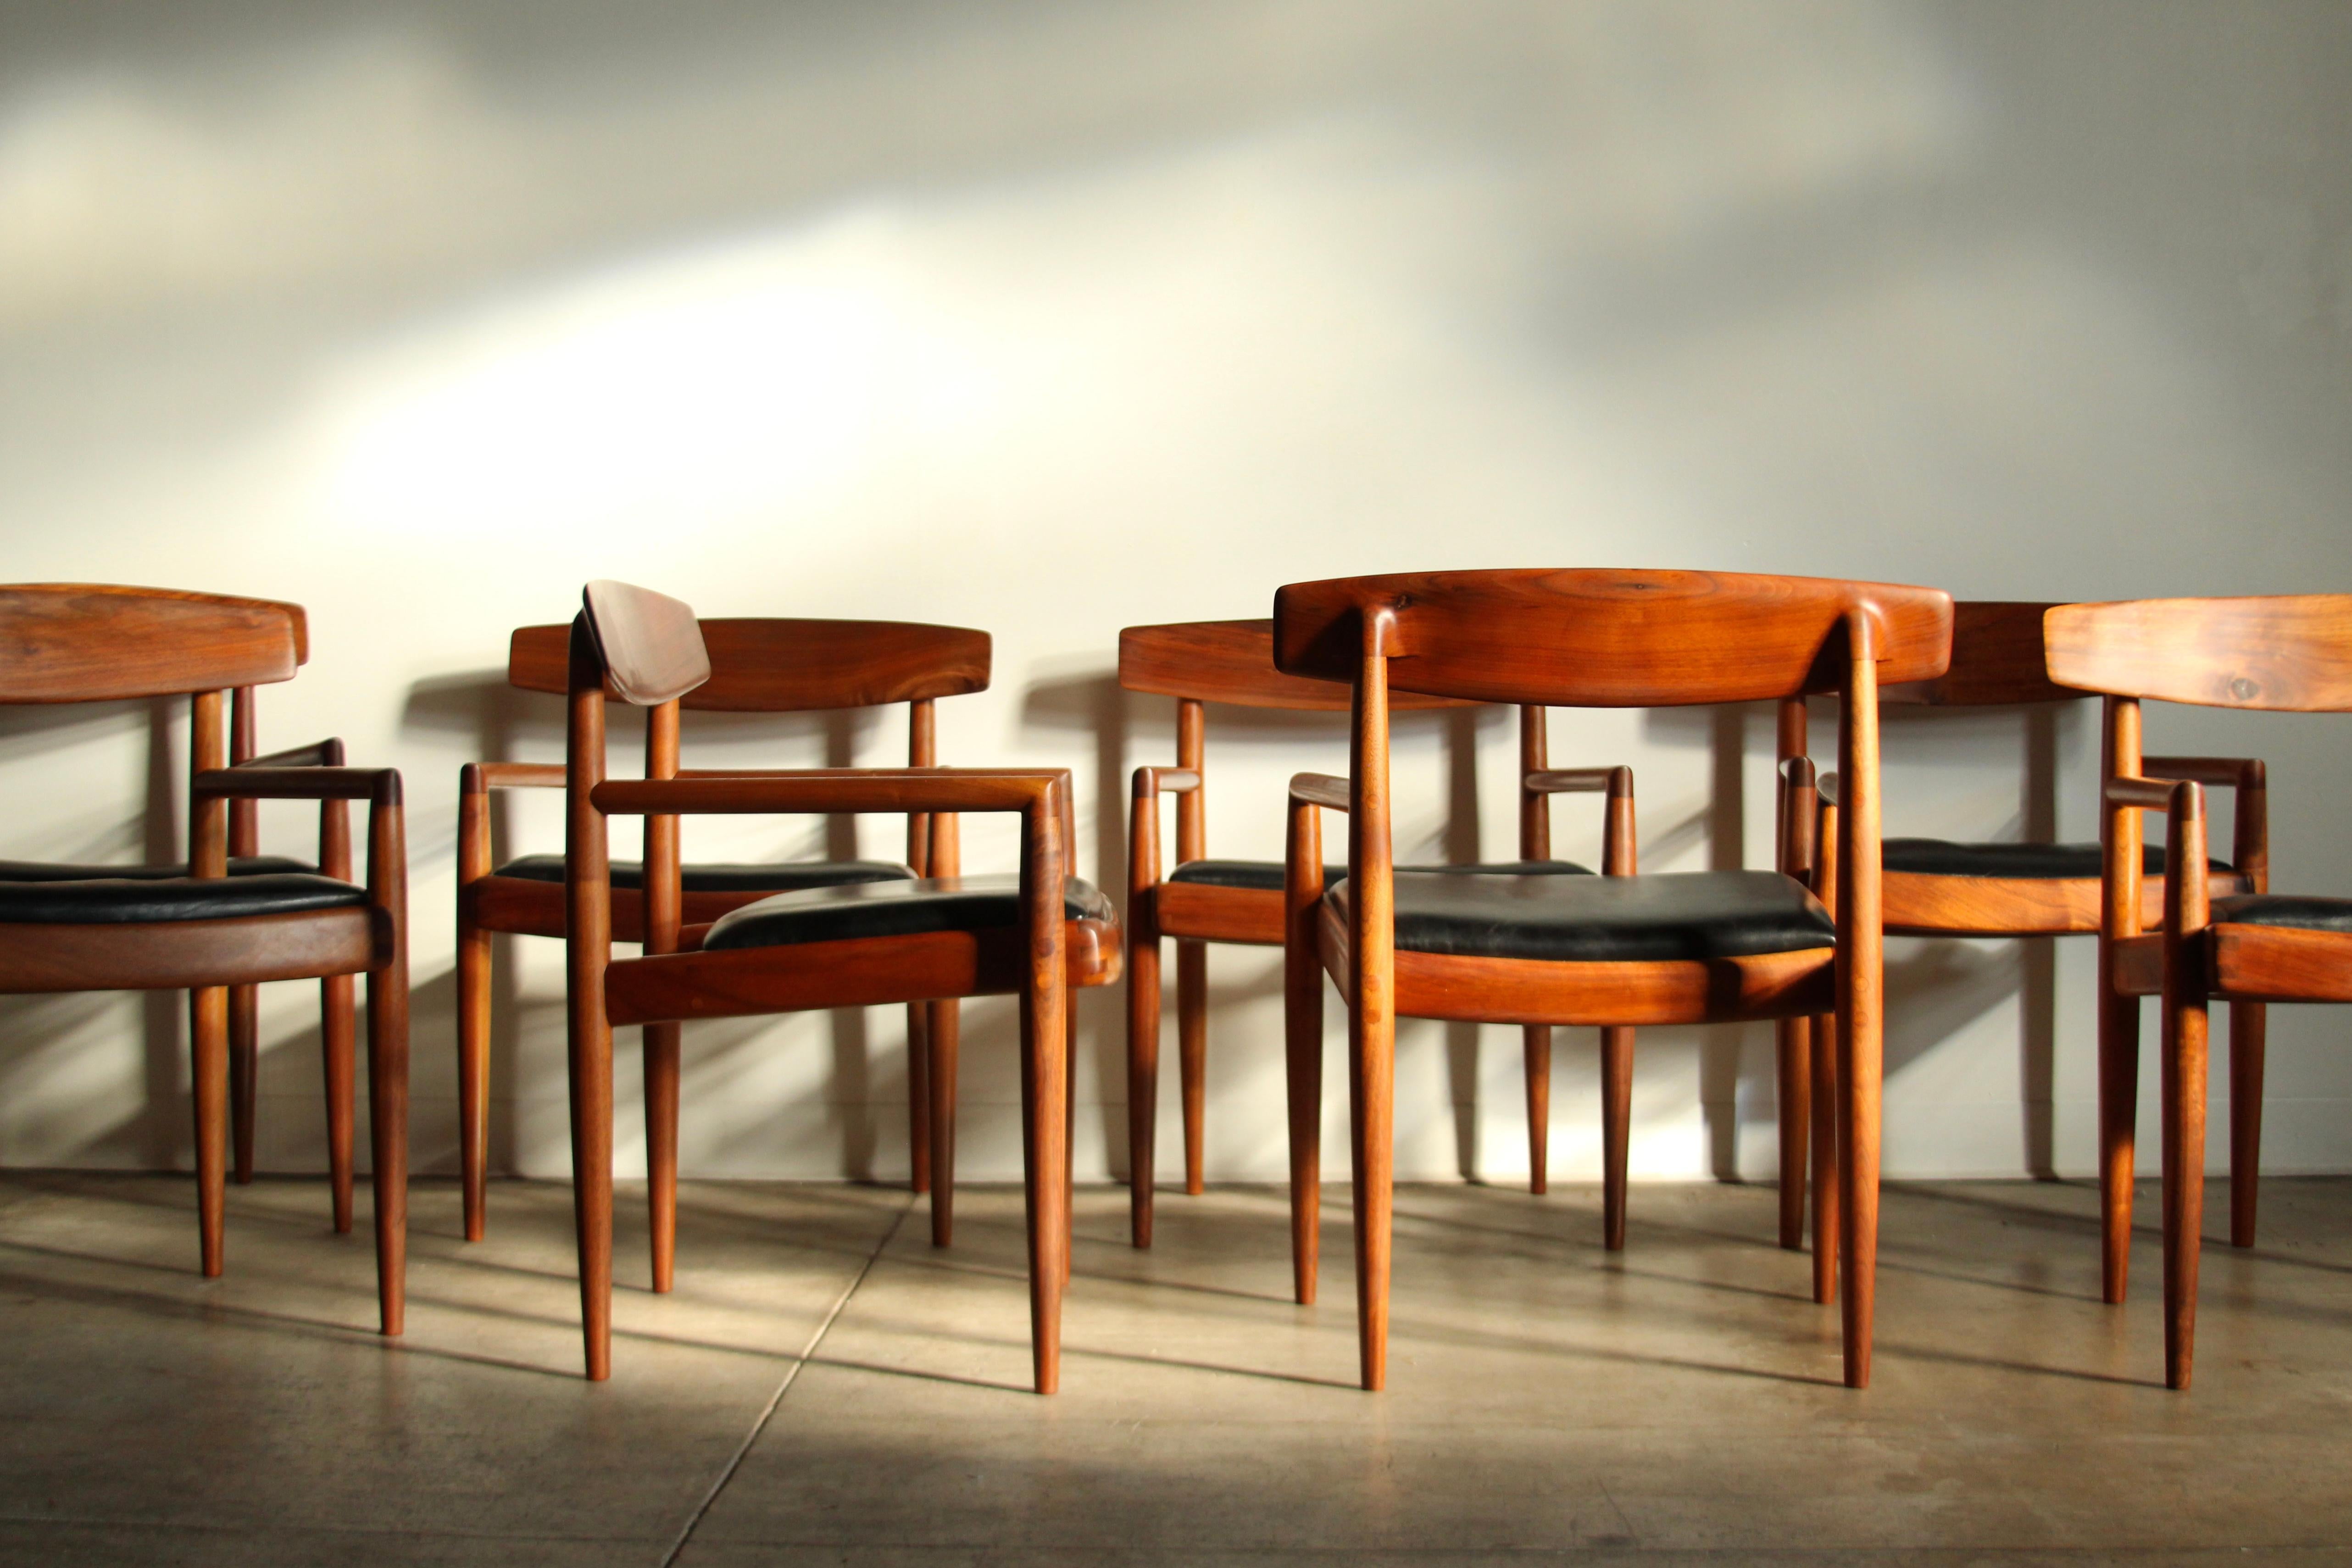 A large and exquisite set of eight dining chairs by the California master, Sam Maloof, executed in stunning, highly figured claro walnut. Six of the chairs were built in the 1960s and two chairs were added to the set by the original owners in 1974.